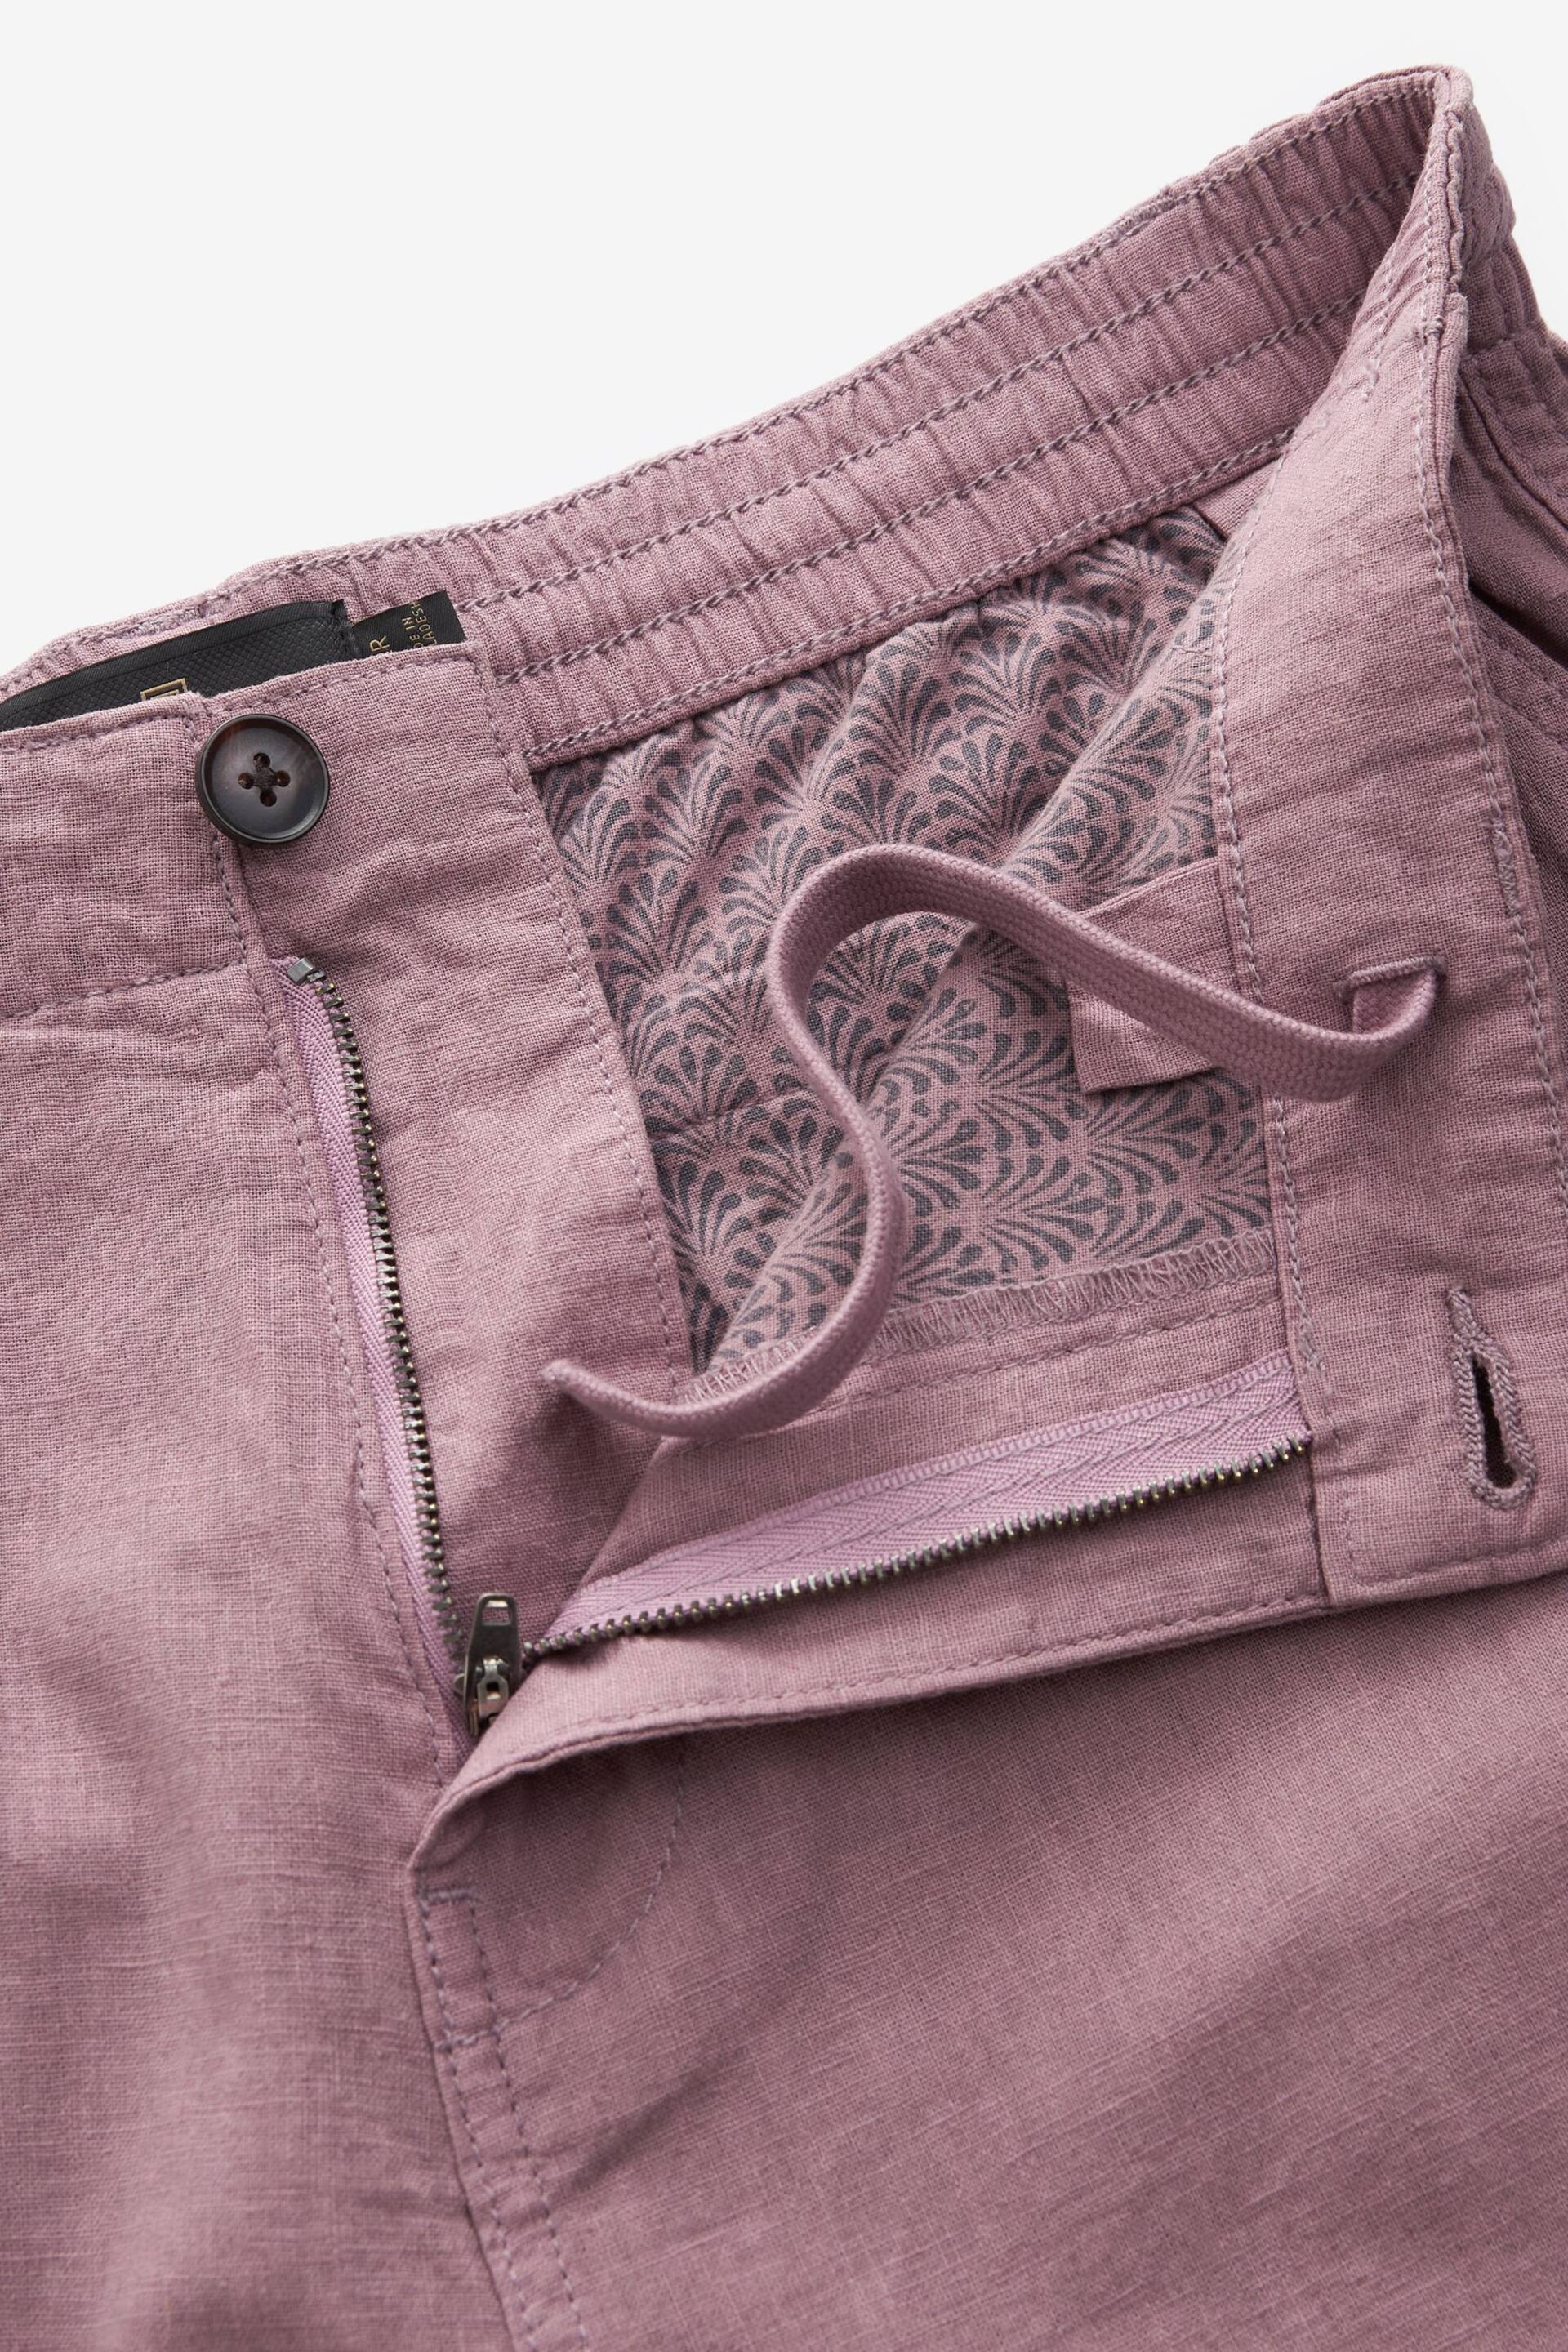 Pink Linen Blend Chino Shorts - Image 6 of 9